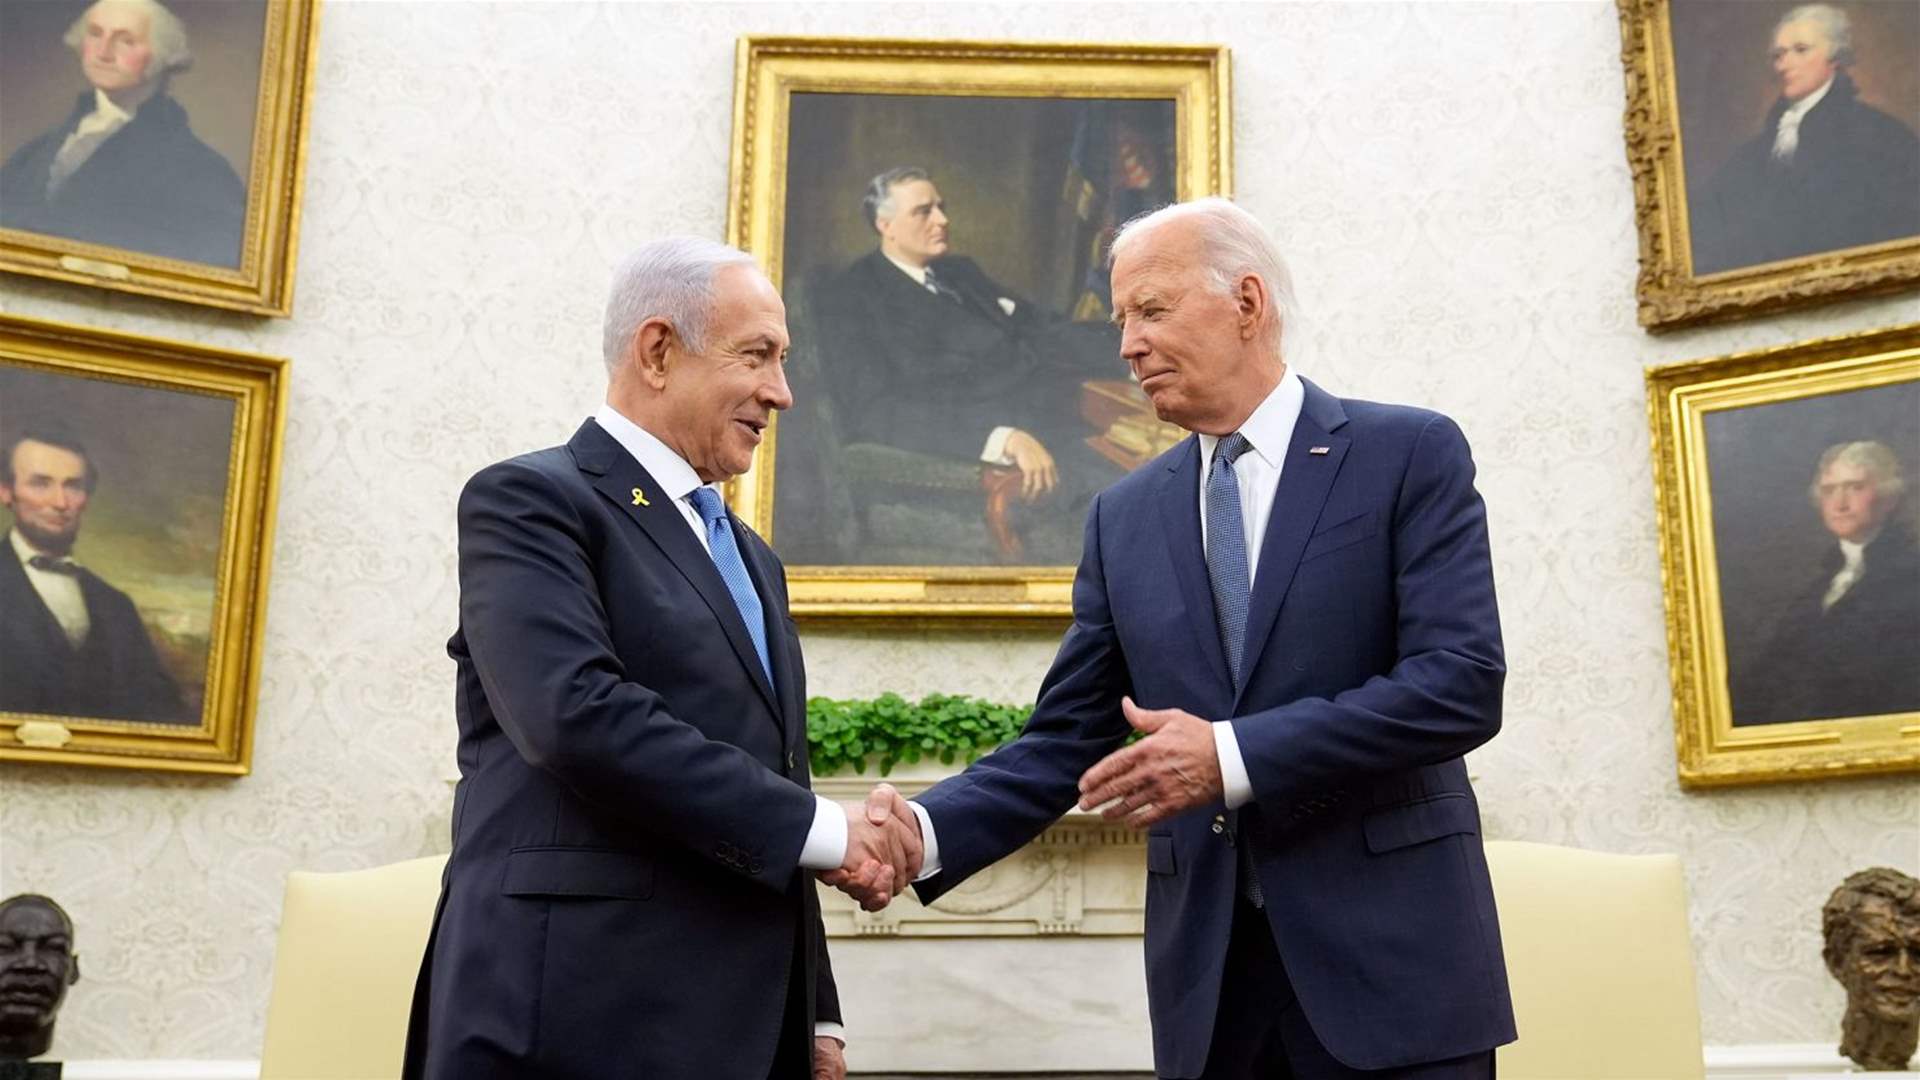 Biden urges Netanyahu to reach ceasefire in Gaza and protect civilians